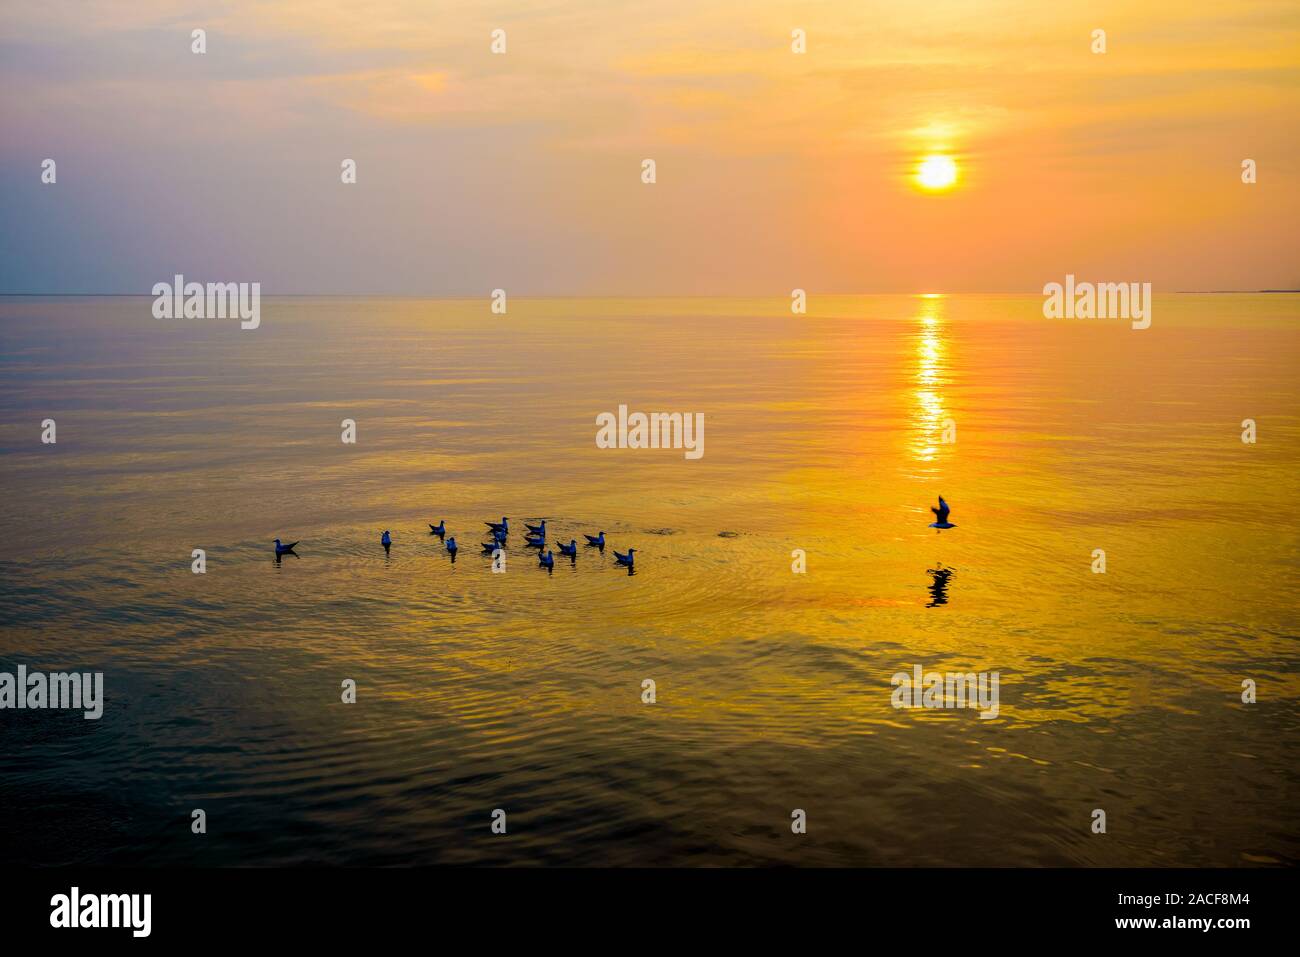 Flock of seagulls birds floating in the sea, the bright sun on the orange, yellow colorful sky sunlight reflect the water, Animal in beautiful nature Stock Photo